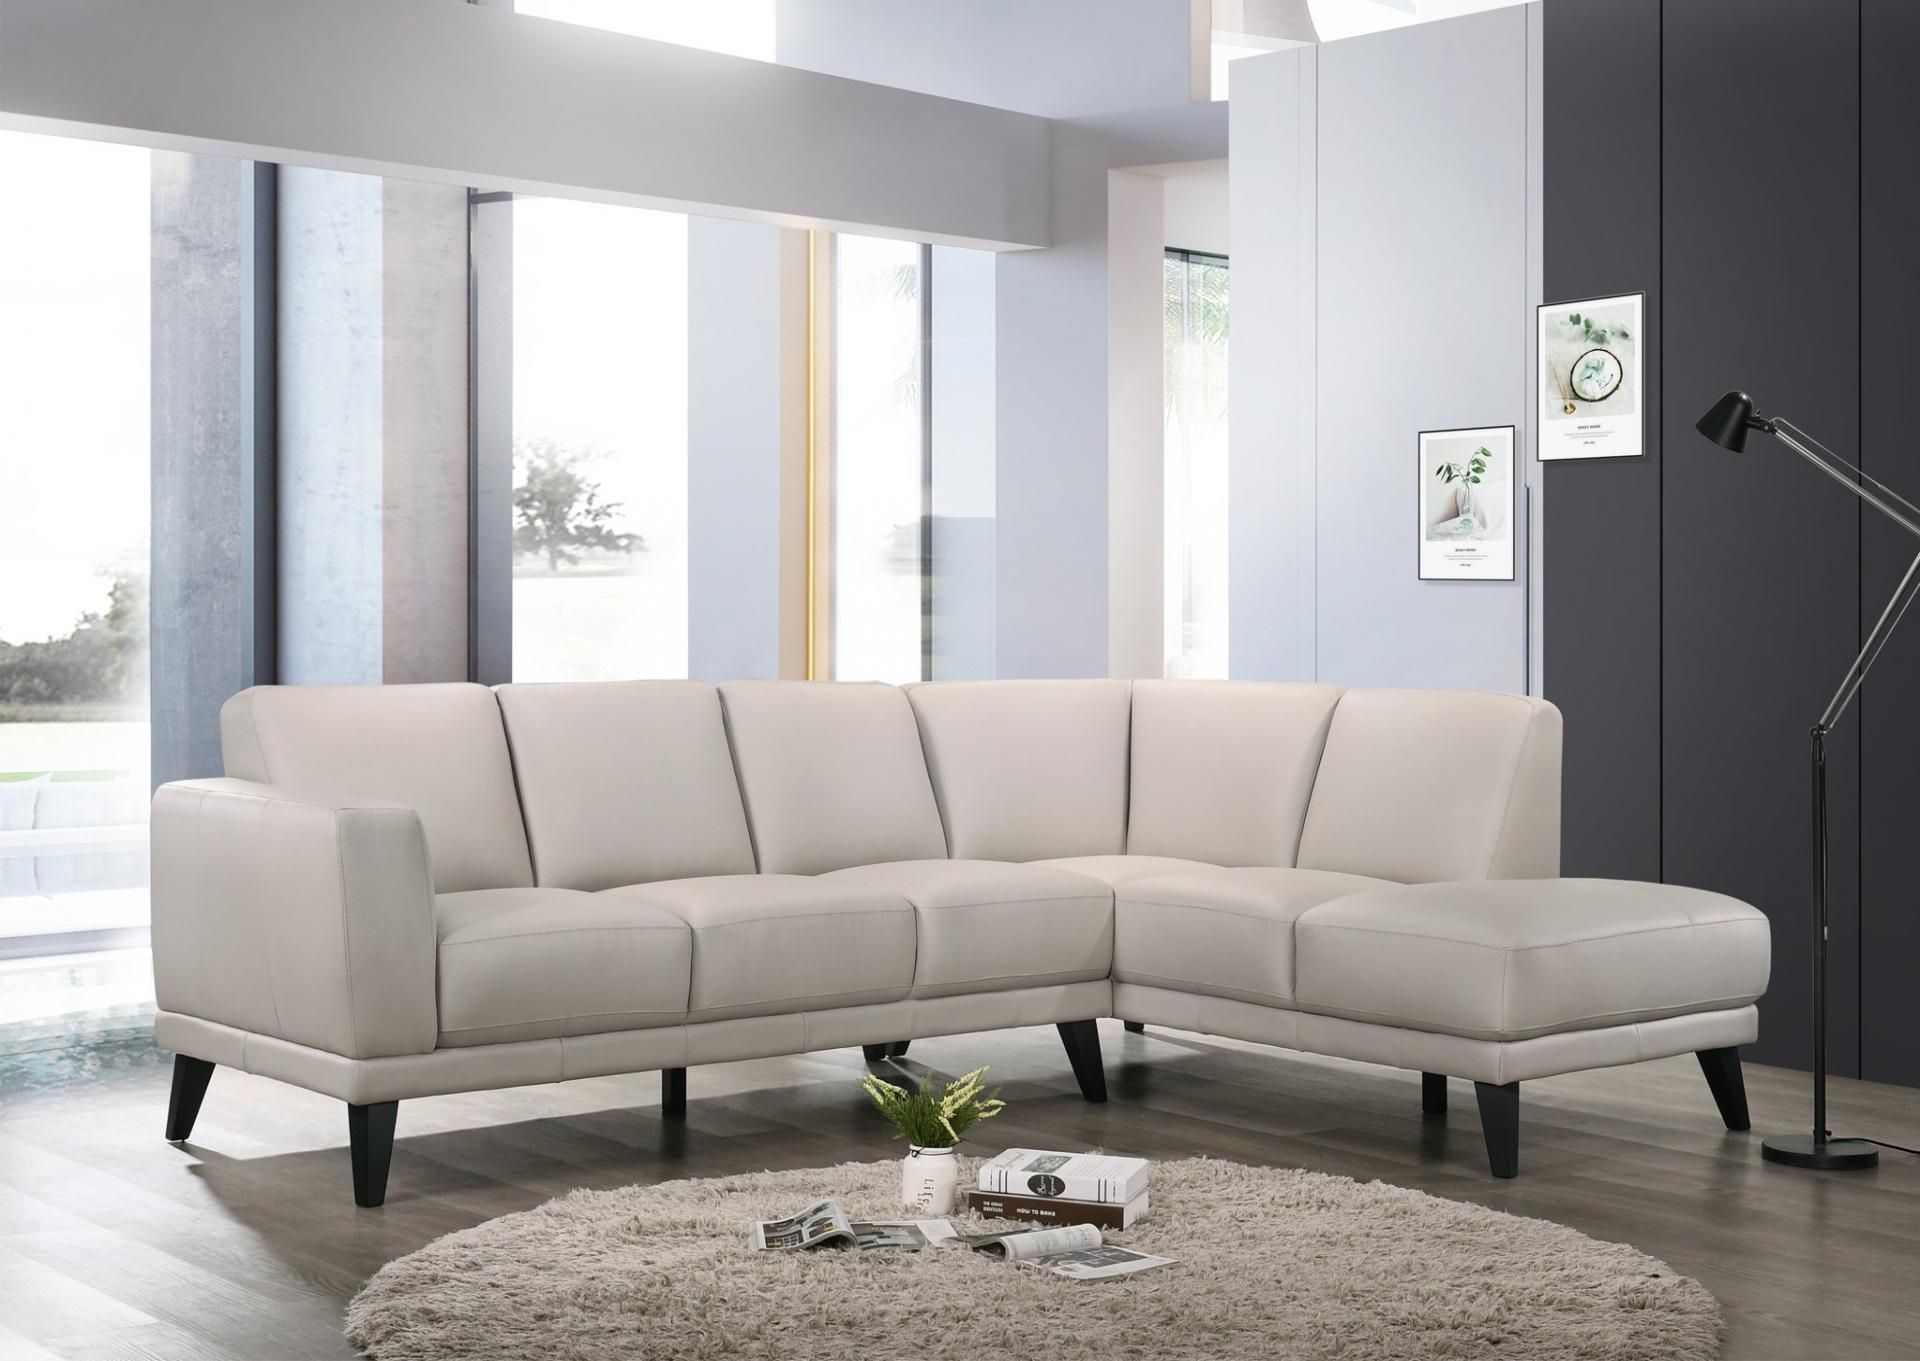 Altimura Gray Mist 2Pc 100 Percent Top Grain Leather Sofa With [%Matilda 100% Top Grain Leather Chaise Sectional Sofas|Matilda 100% Top Grain Leather Chaise Sectional Sofas%] (View 8 of 15)